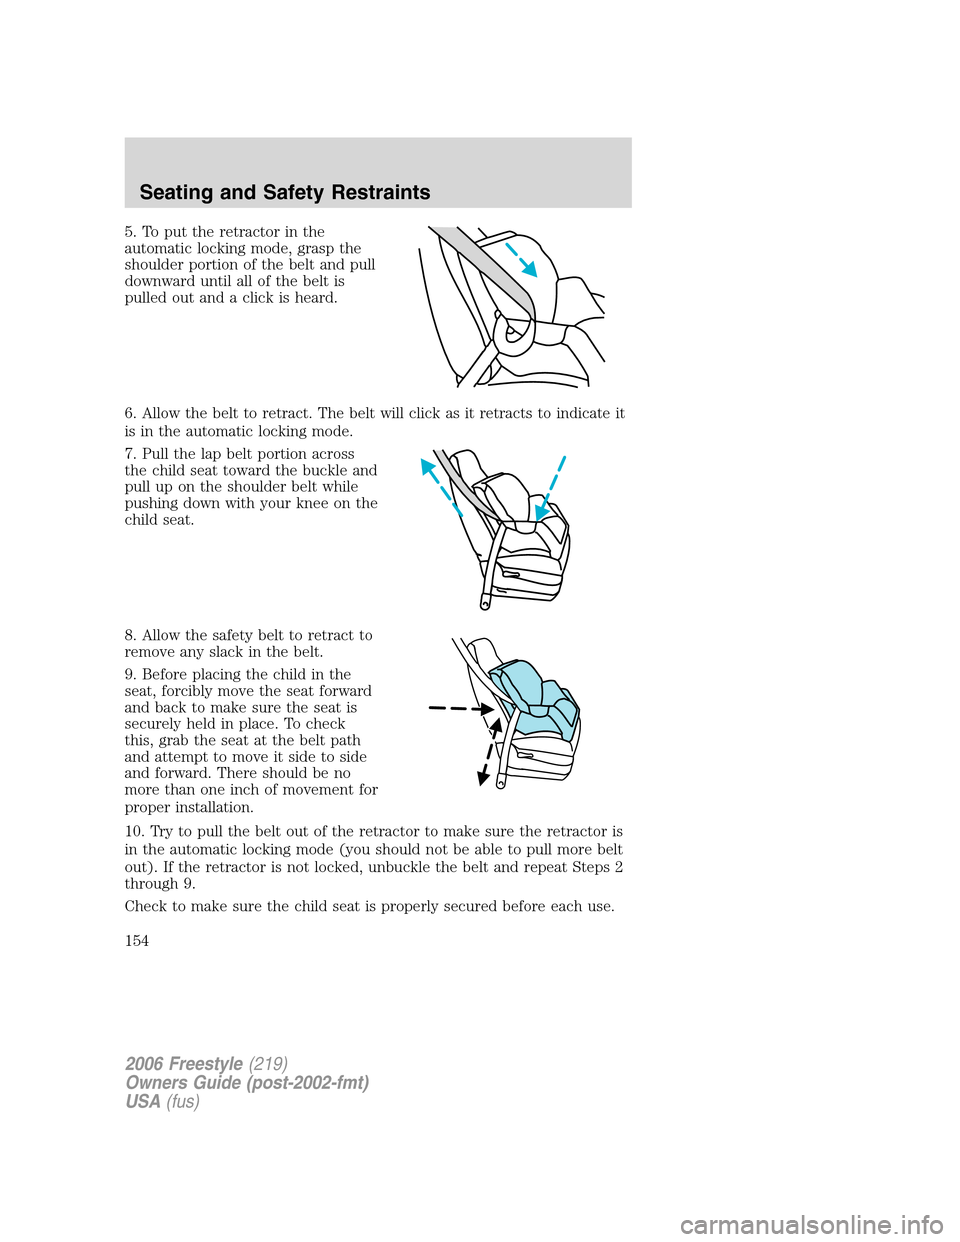 FORD FREESTYLE 2006 1.G Owners Manual 5. To put the retractor in the
automatic locking mode, grasp the
shoulder portion of the belt and pull
downward until all of the belt is
pulled out and a click is heard.
6. Allow the belt to retract. 